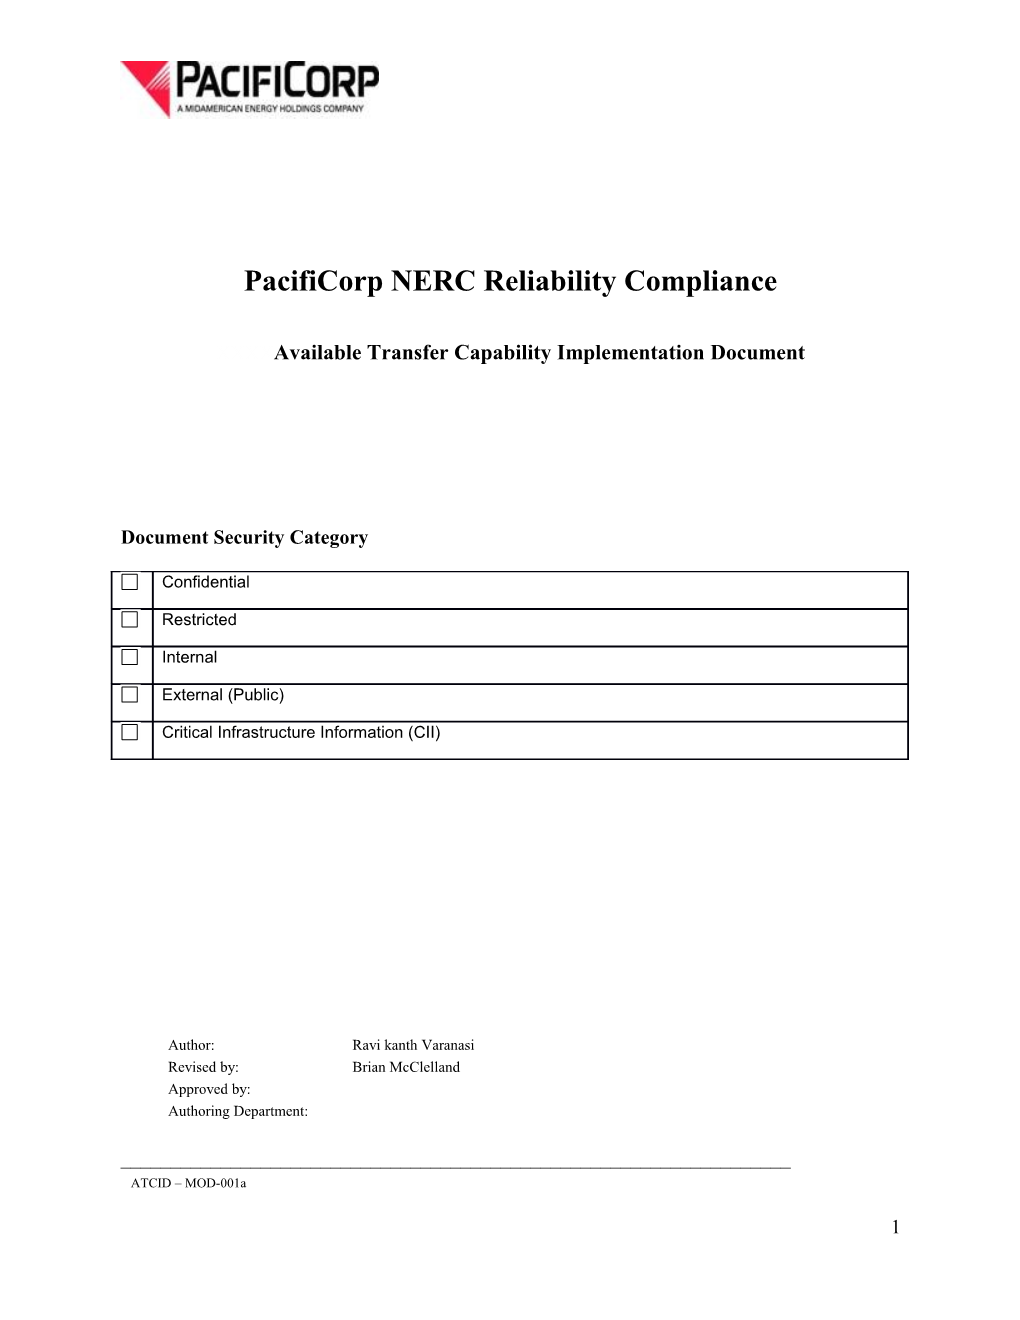 Pacificorp NERC Reliability Compliance